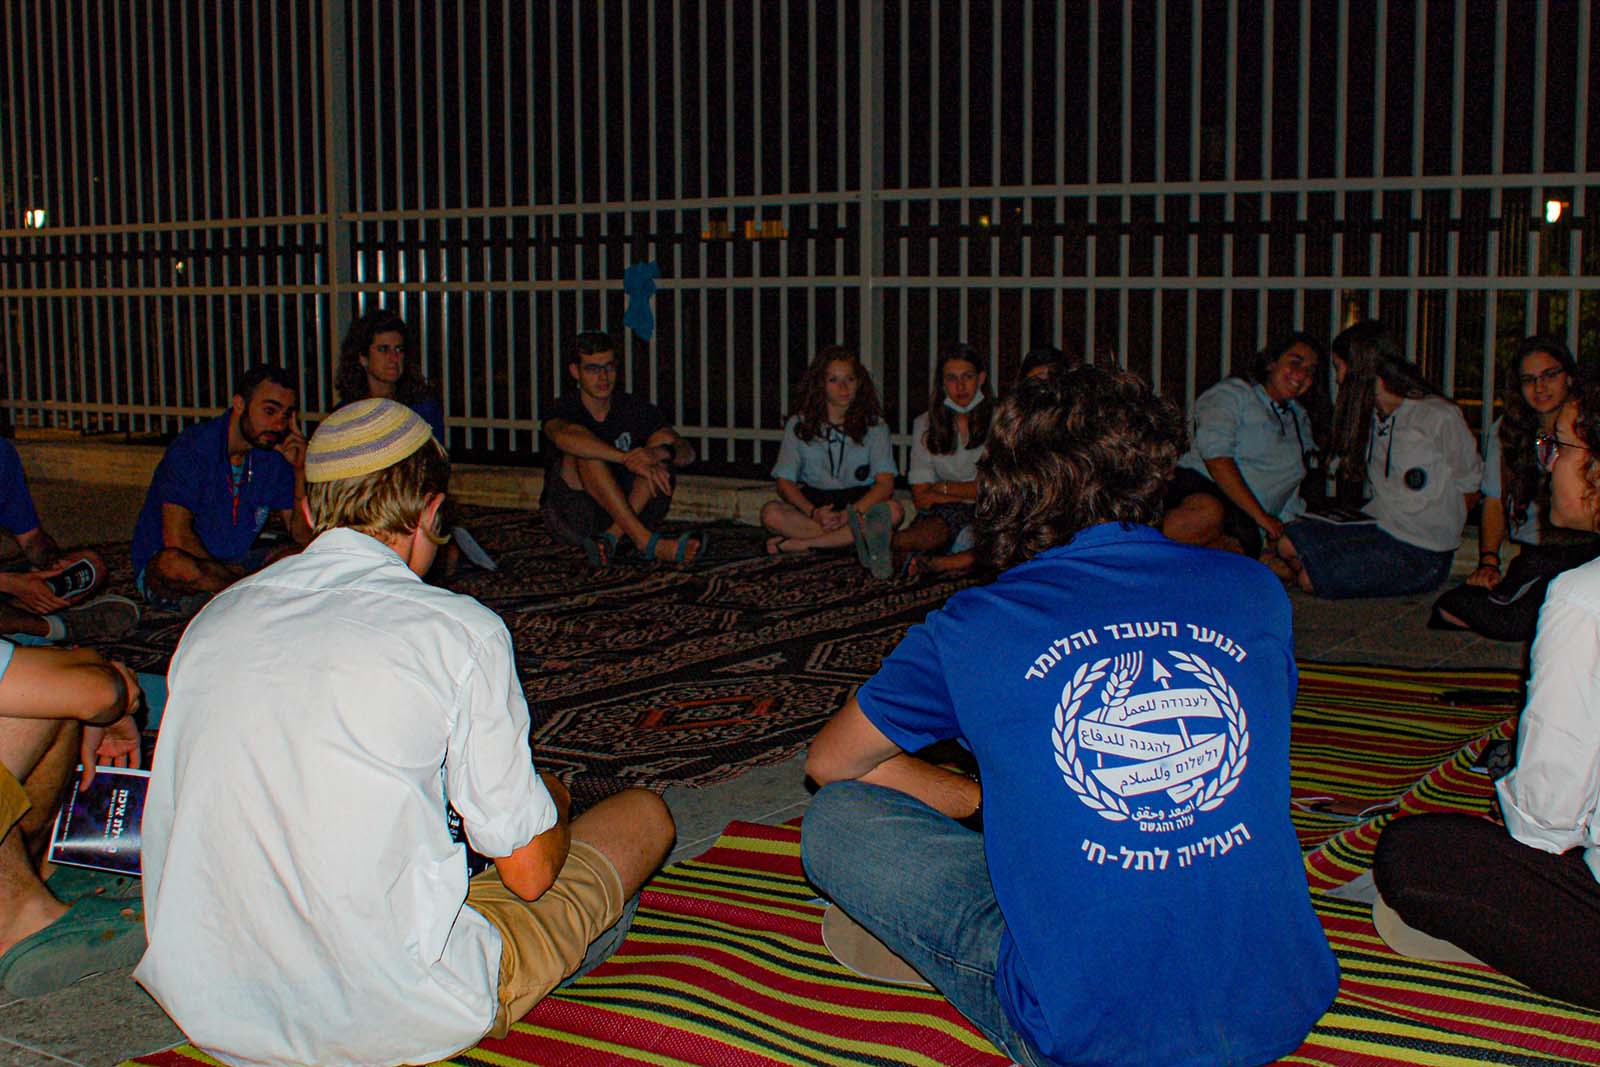 Discussion circles with members of HaNoar HaOved v’Halomed, Bnei Akiva and Dror Israel (Photo: David Tversky).